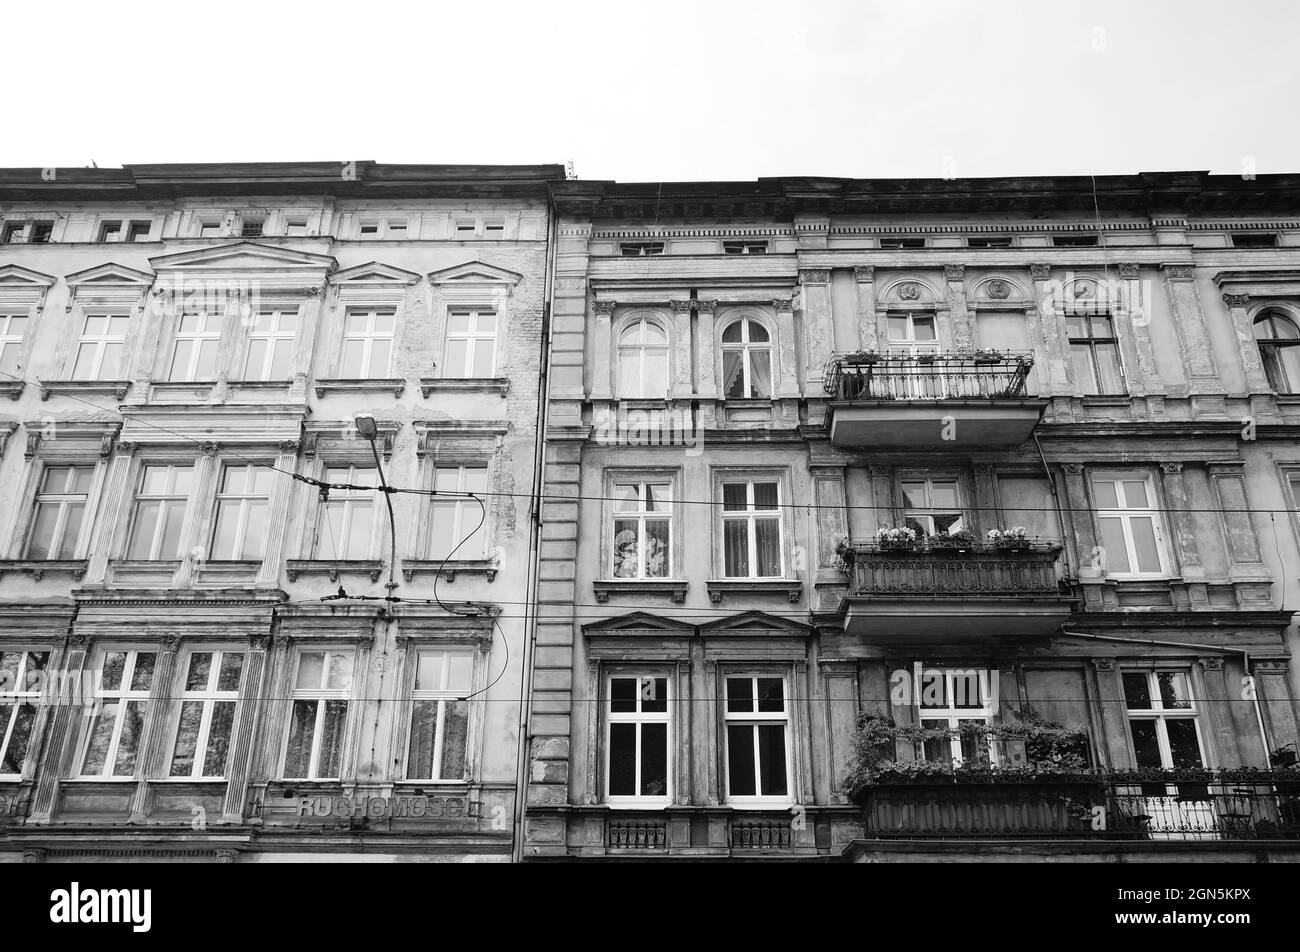 POZNAN, POLAND - May 22, 2017: A grayscale shot of a high apartment building in Poznan, Poland Stock Photo